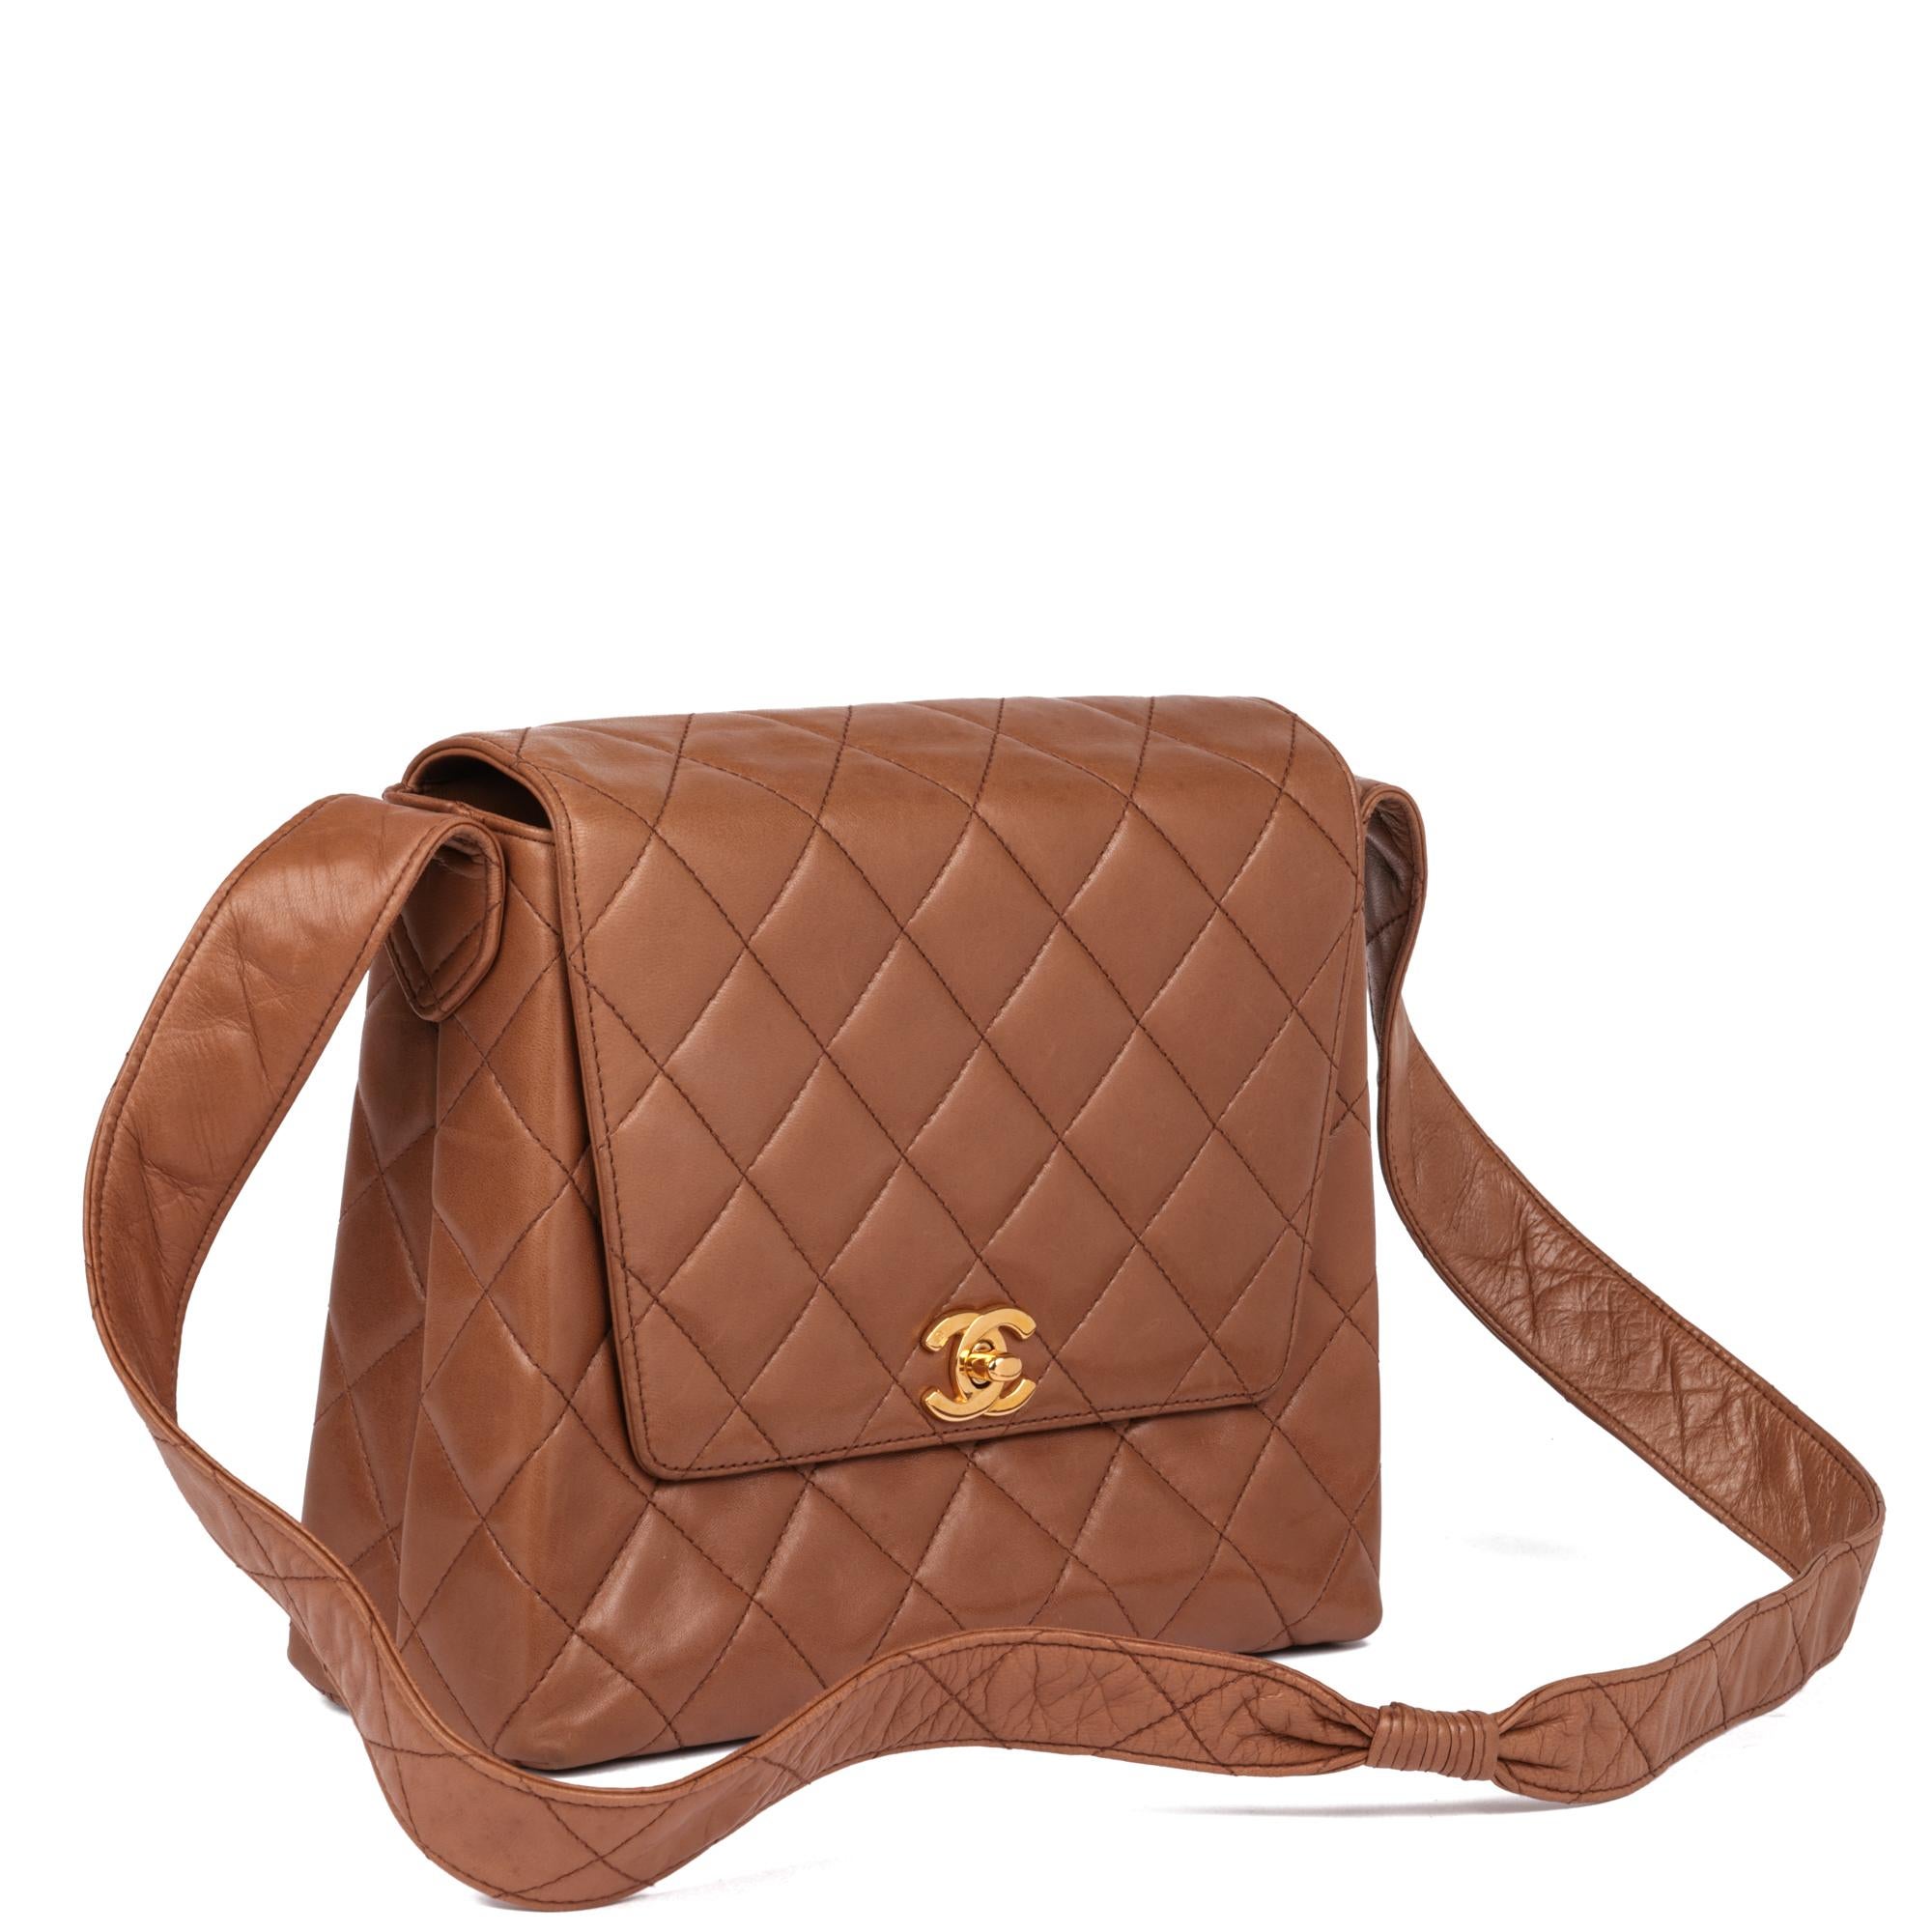 CHANEL
Caramel Quilted Lambskin Vintage Small Classic Single Flap Bag

Xupes Reference: HB5127
Serial Number: 4748421
Age (Circa): 1996
Accompanied By: Chanel Dust Bag, Authenticity Card
Authenticity Details: Authenticity Card, Serial Sticker (Made